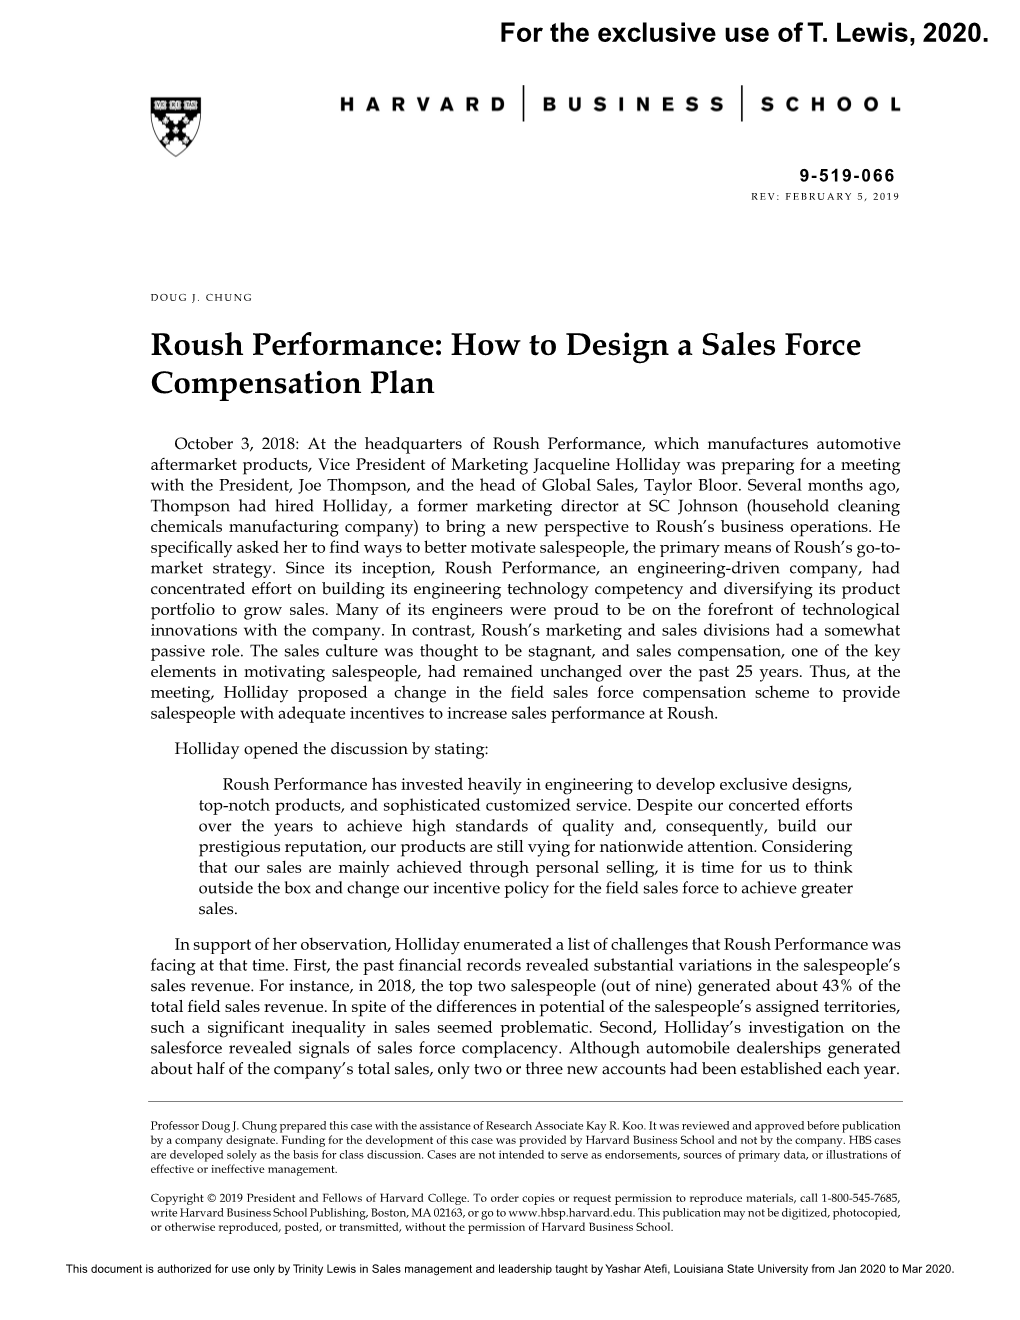 Roush Performance: How to Design a Sales Force Compensation Plan